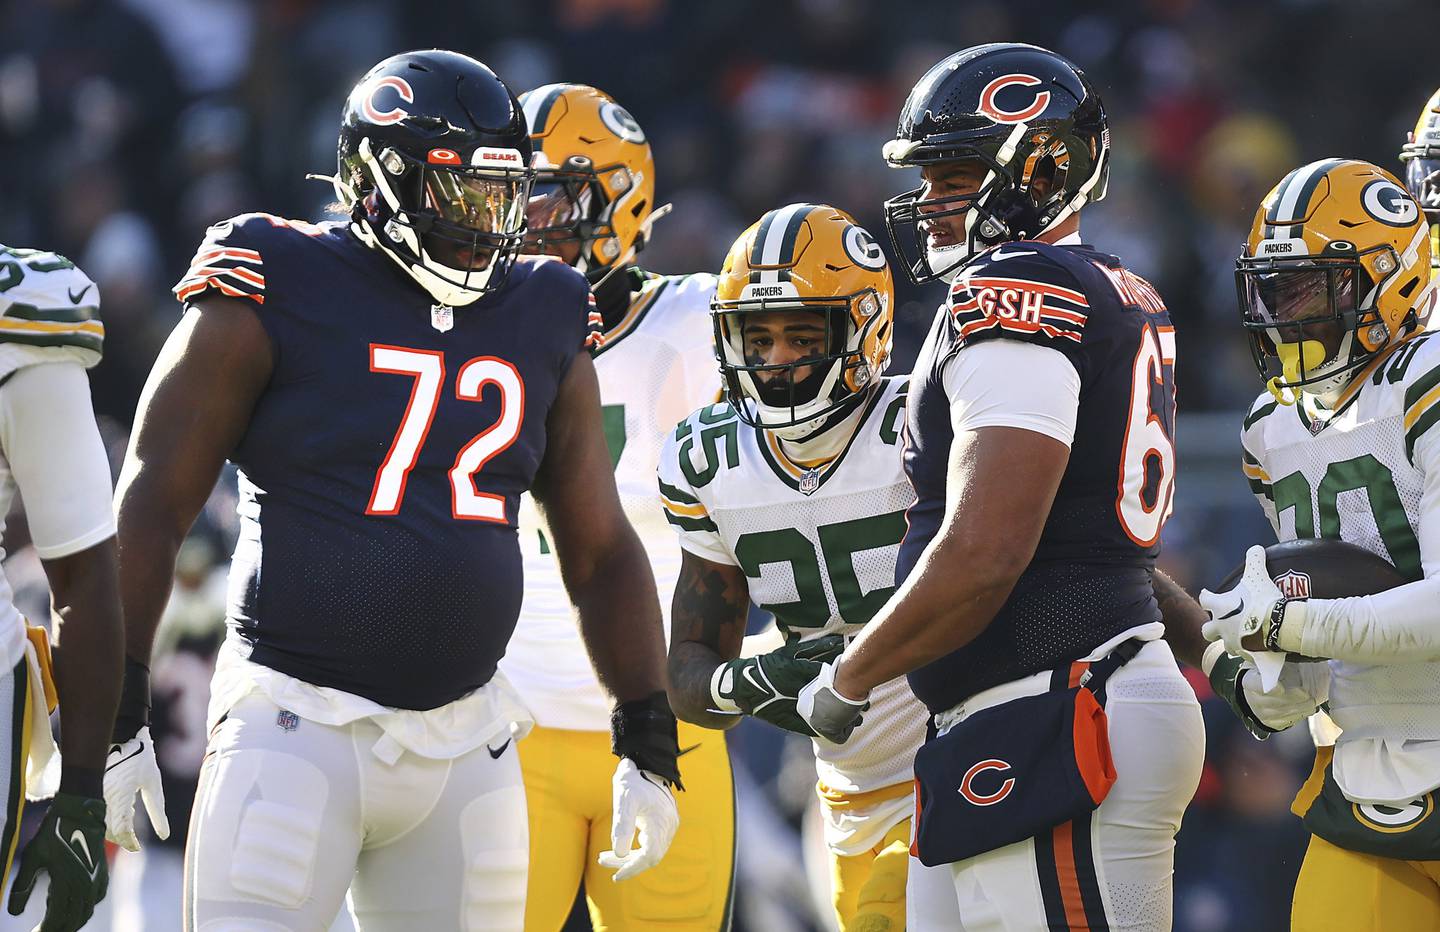 Bears offensive tackle Alex Leatherwood stands on the field during a break in the action against the Packers at Soldier Field on Dec. 4, 2022.